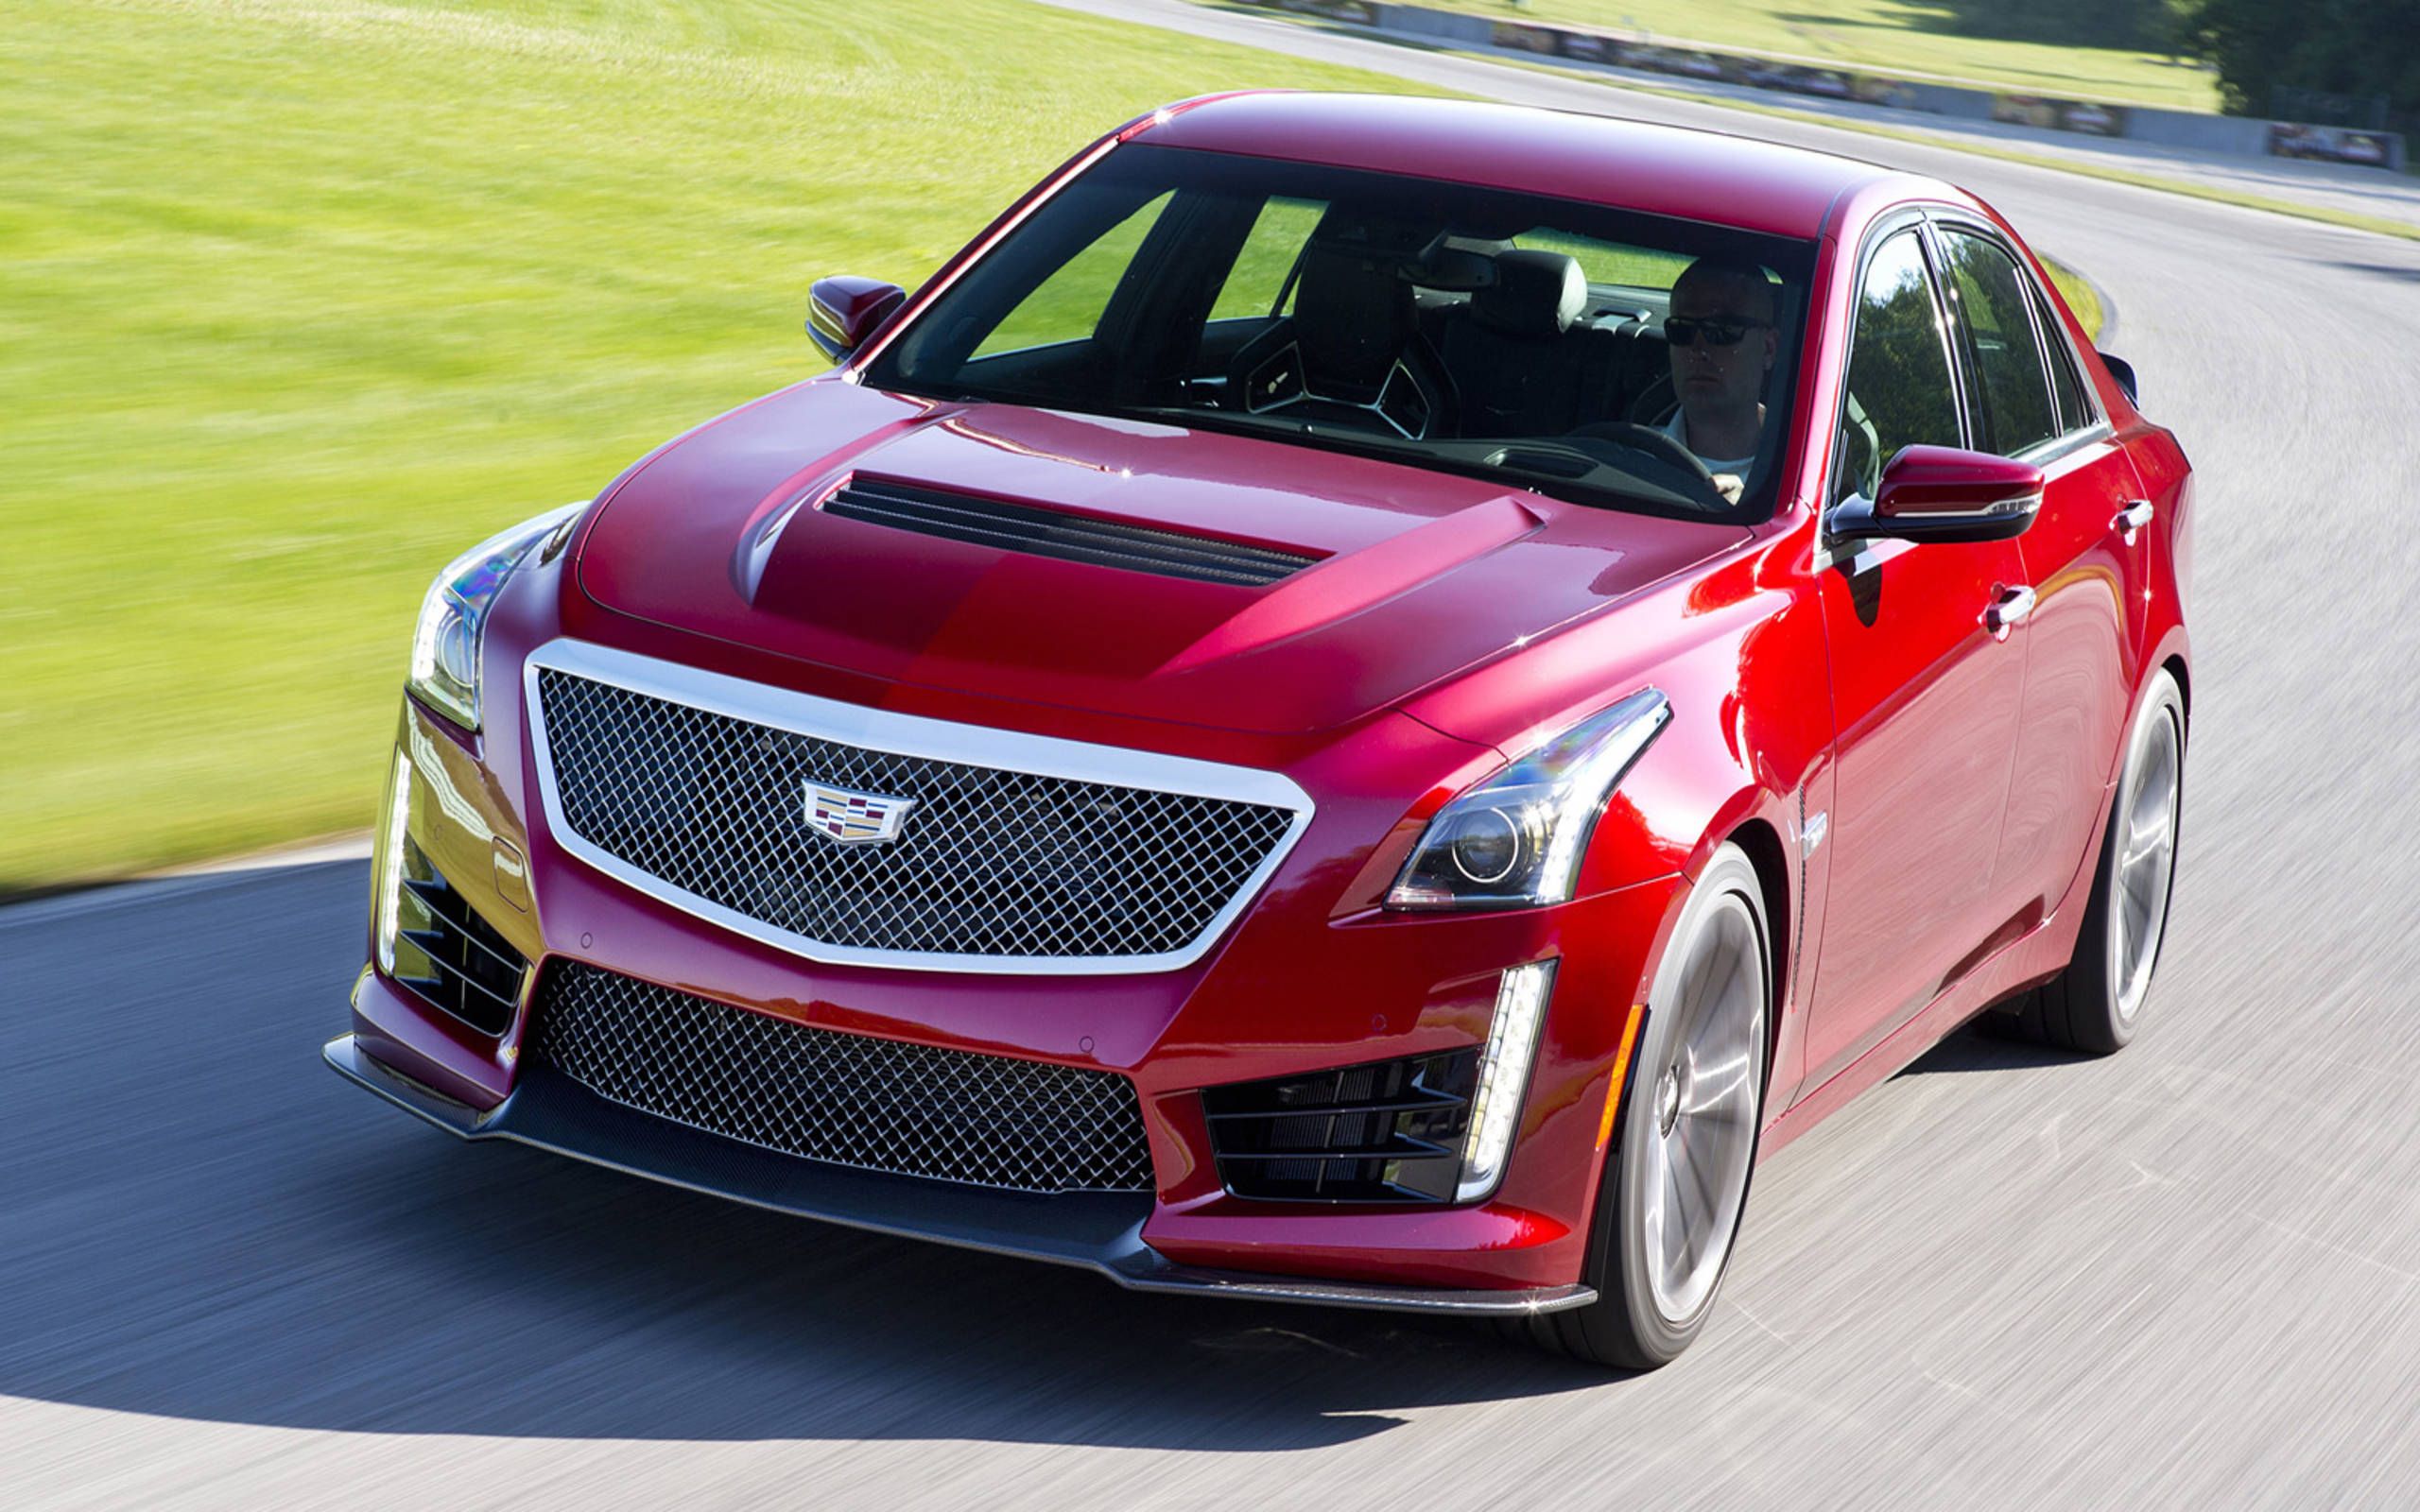 2016 Cadillac CTS-V drive review: World's best sports sedan?